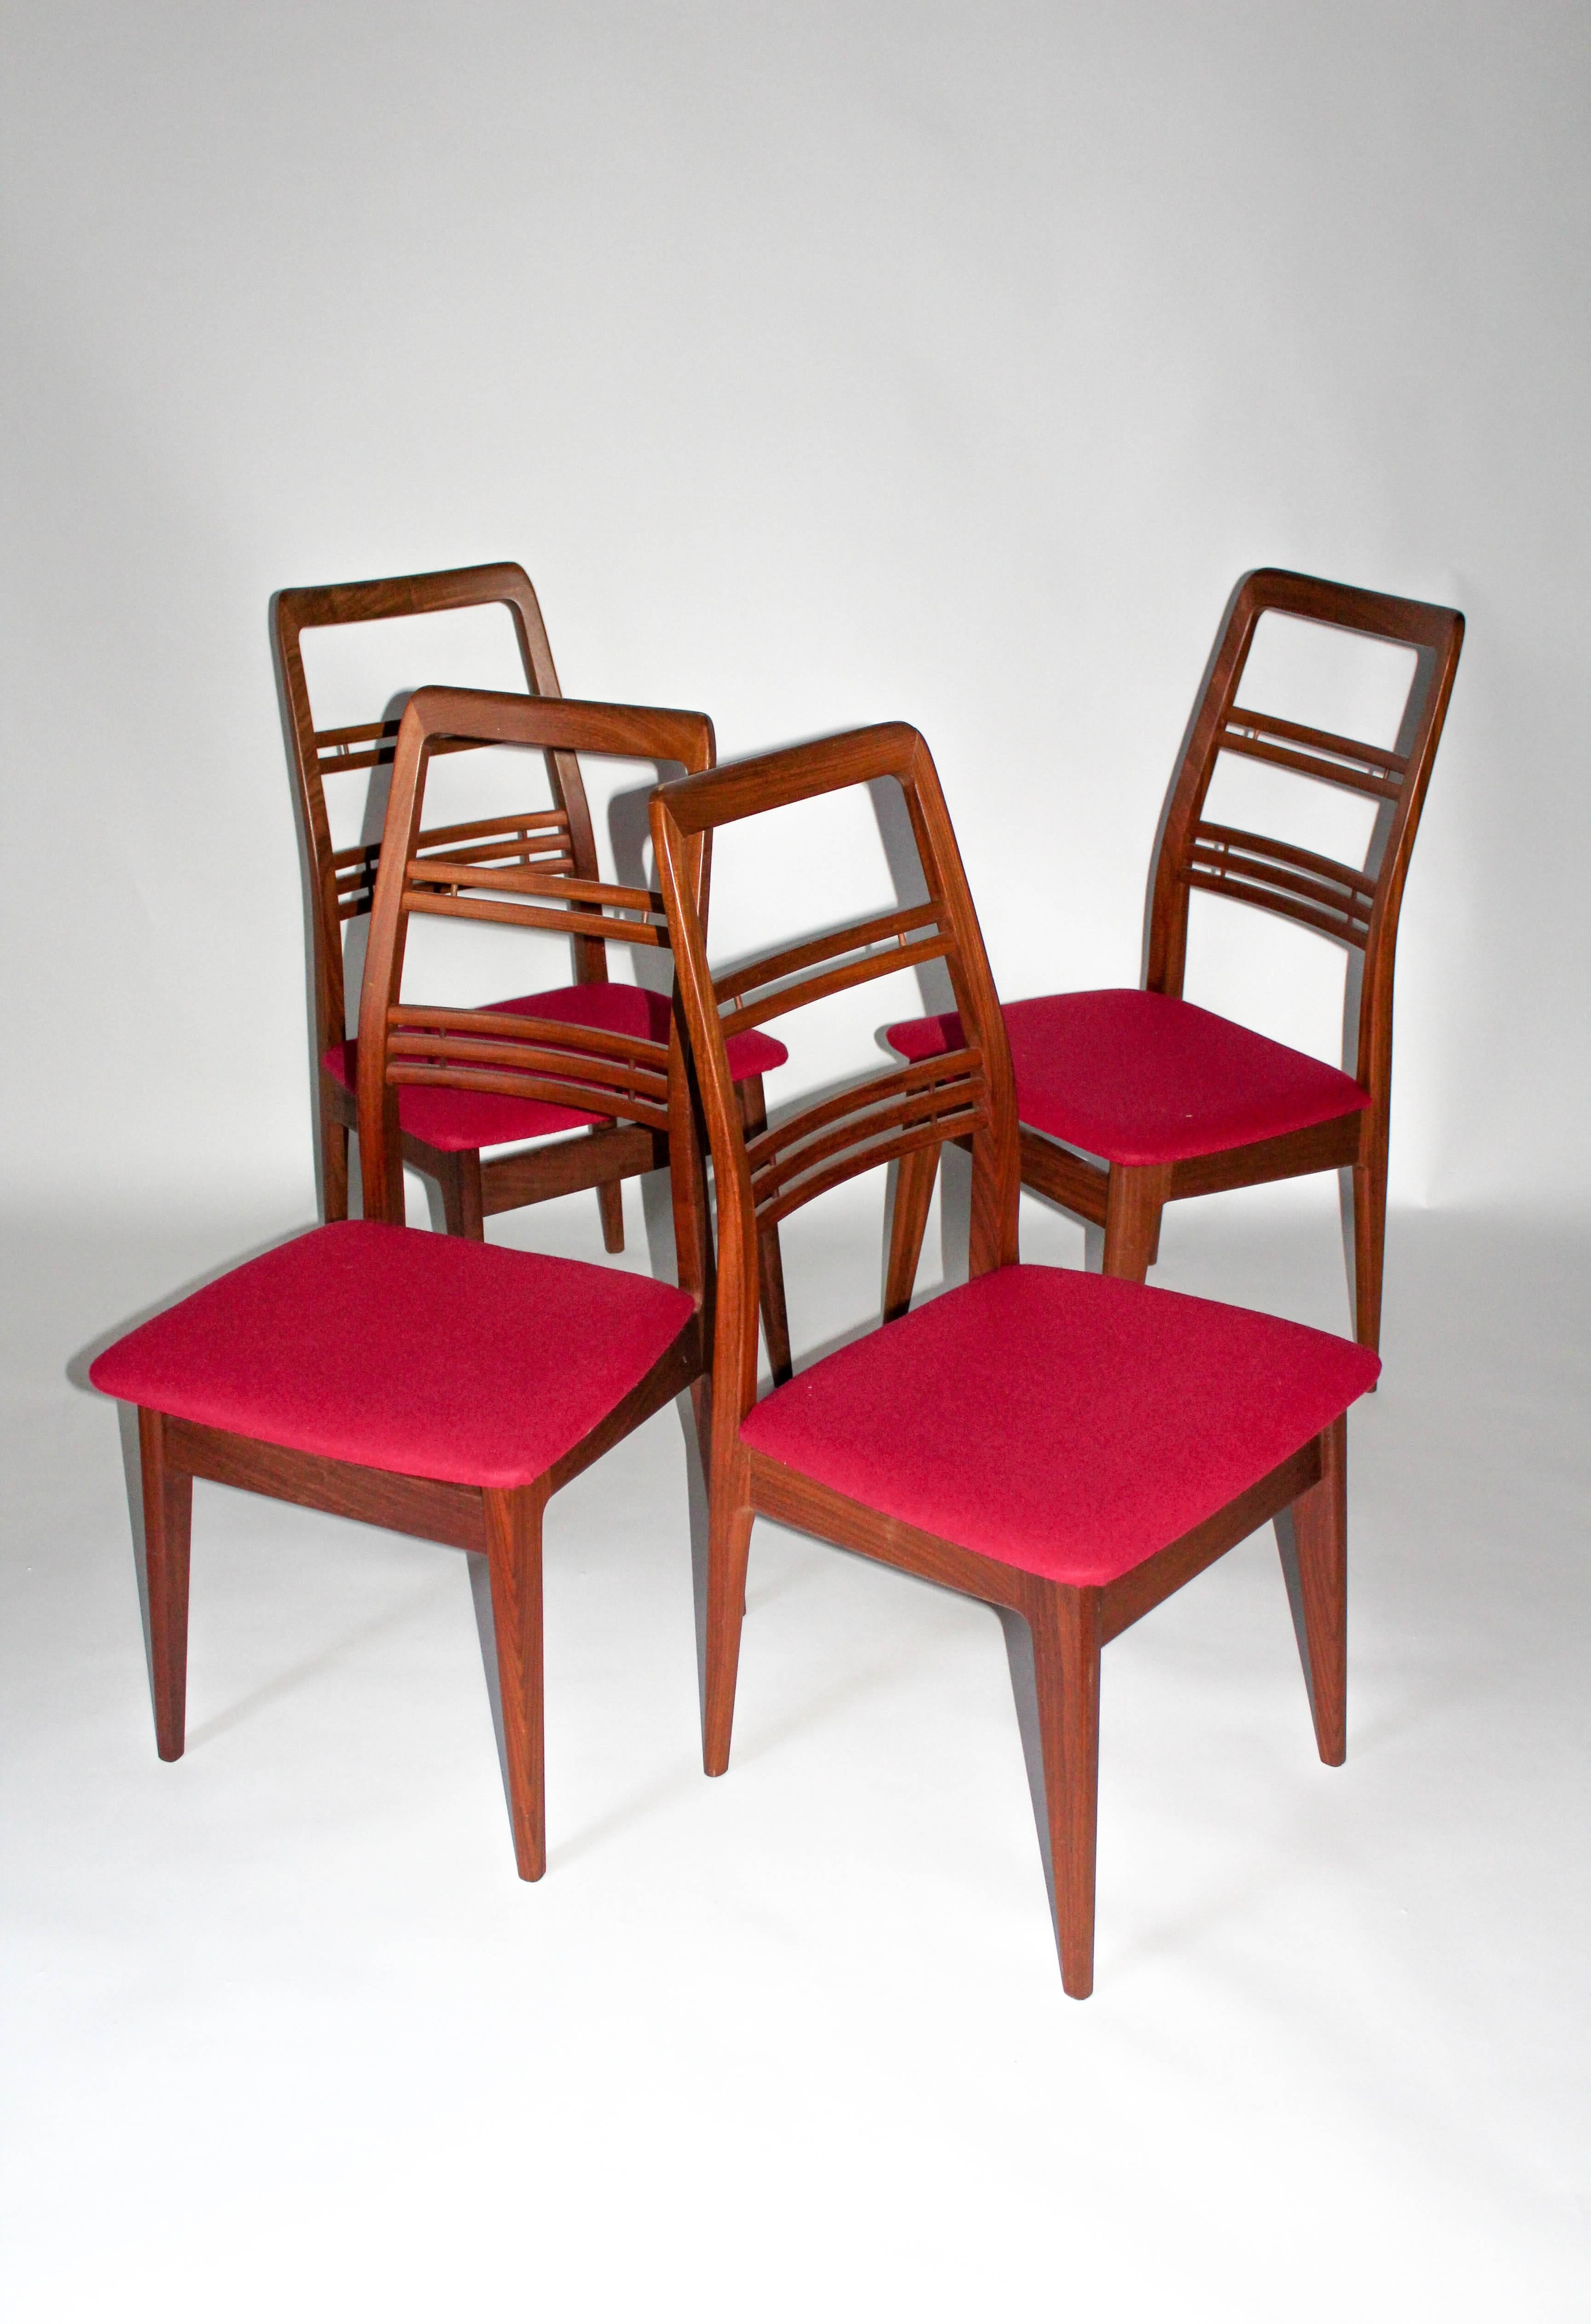 Set of four high back dining chairs by the Swedish designer Svante Skogh. The chairs are made out of teak and are newly upholstered in a cerise 100% wool fabric from Klippan Yllefabrik. Very good vintage condition with minor signs of usage, one